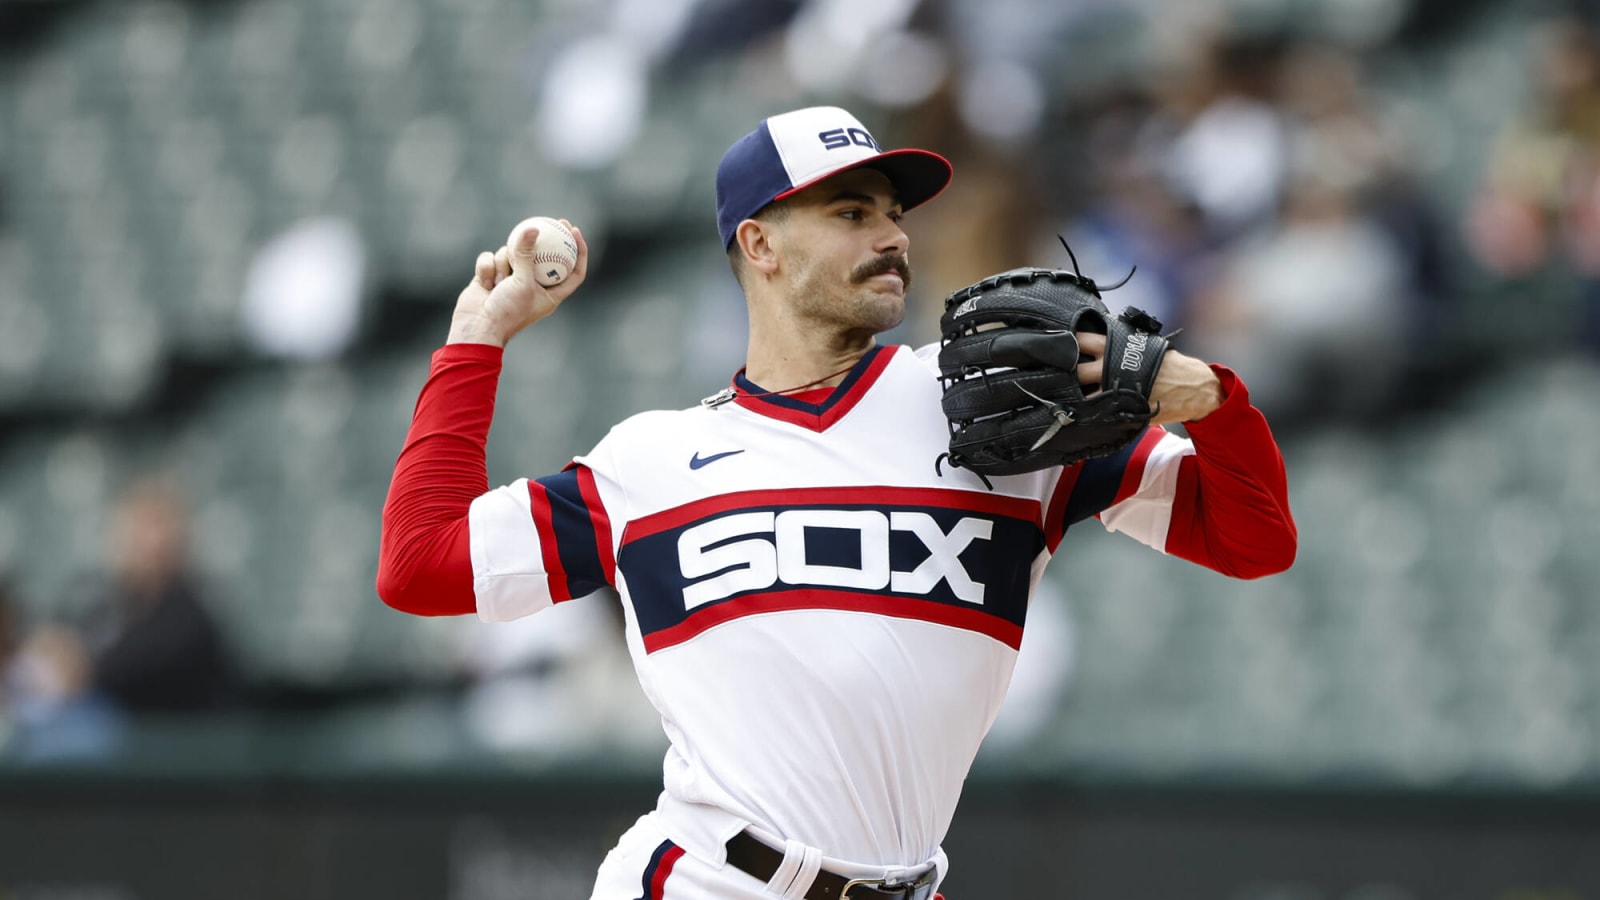 How confident should we be in current White Sox key pieces